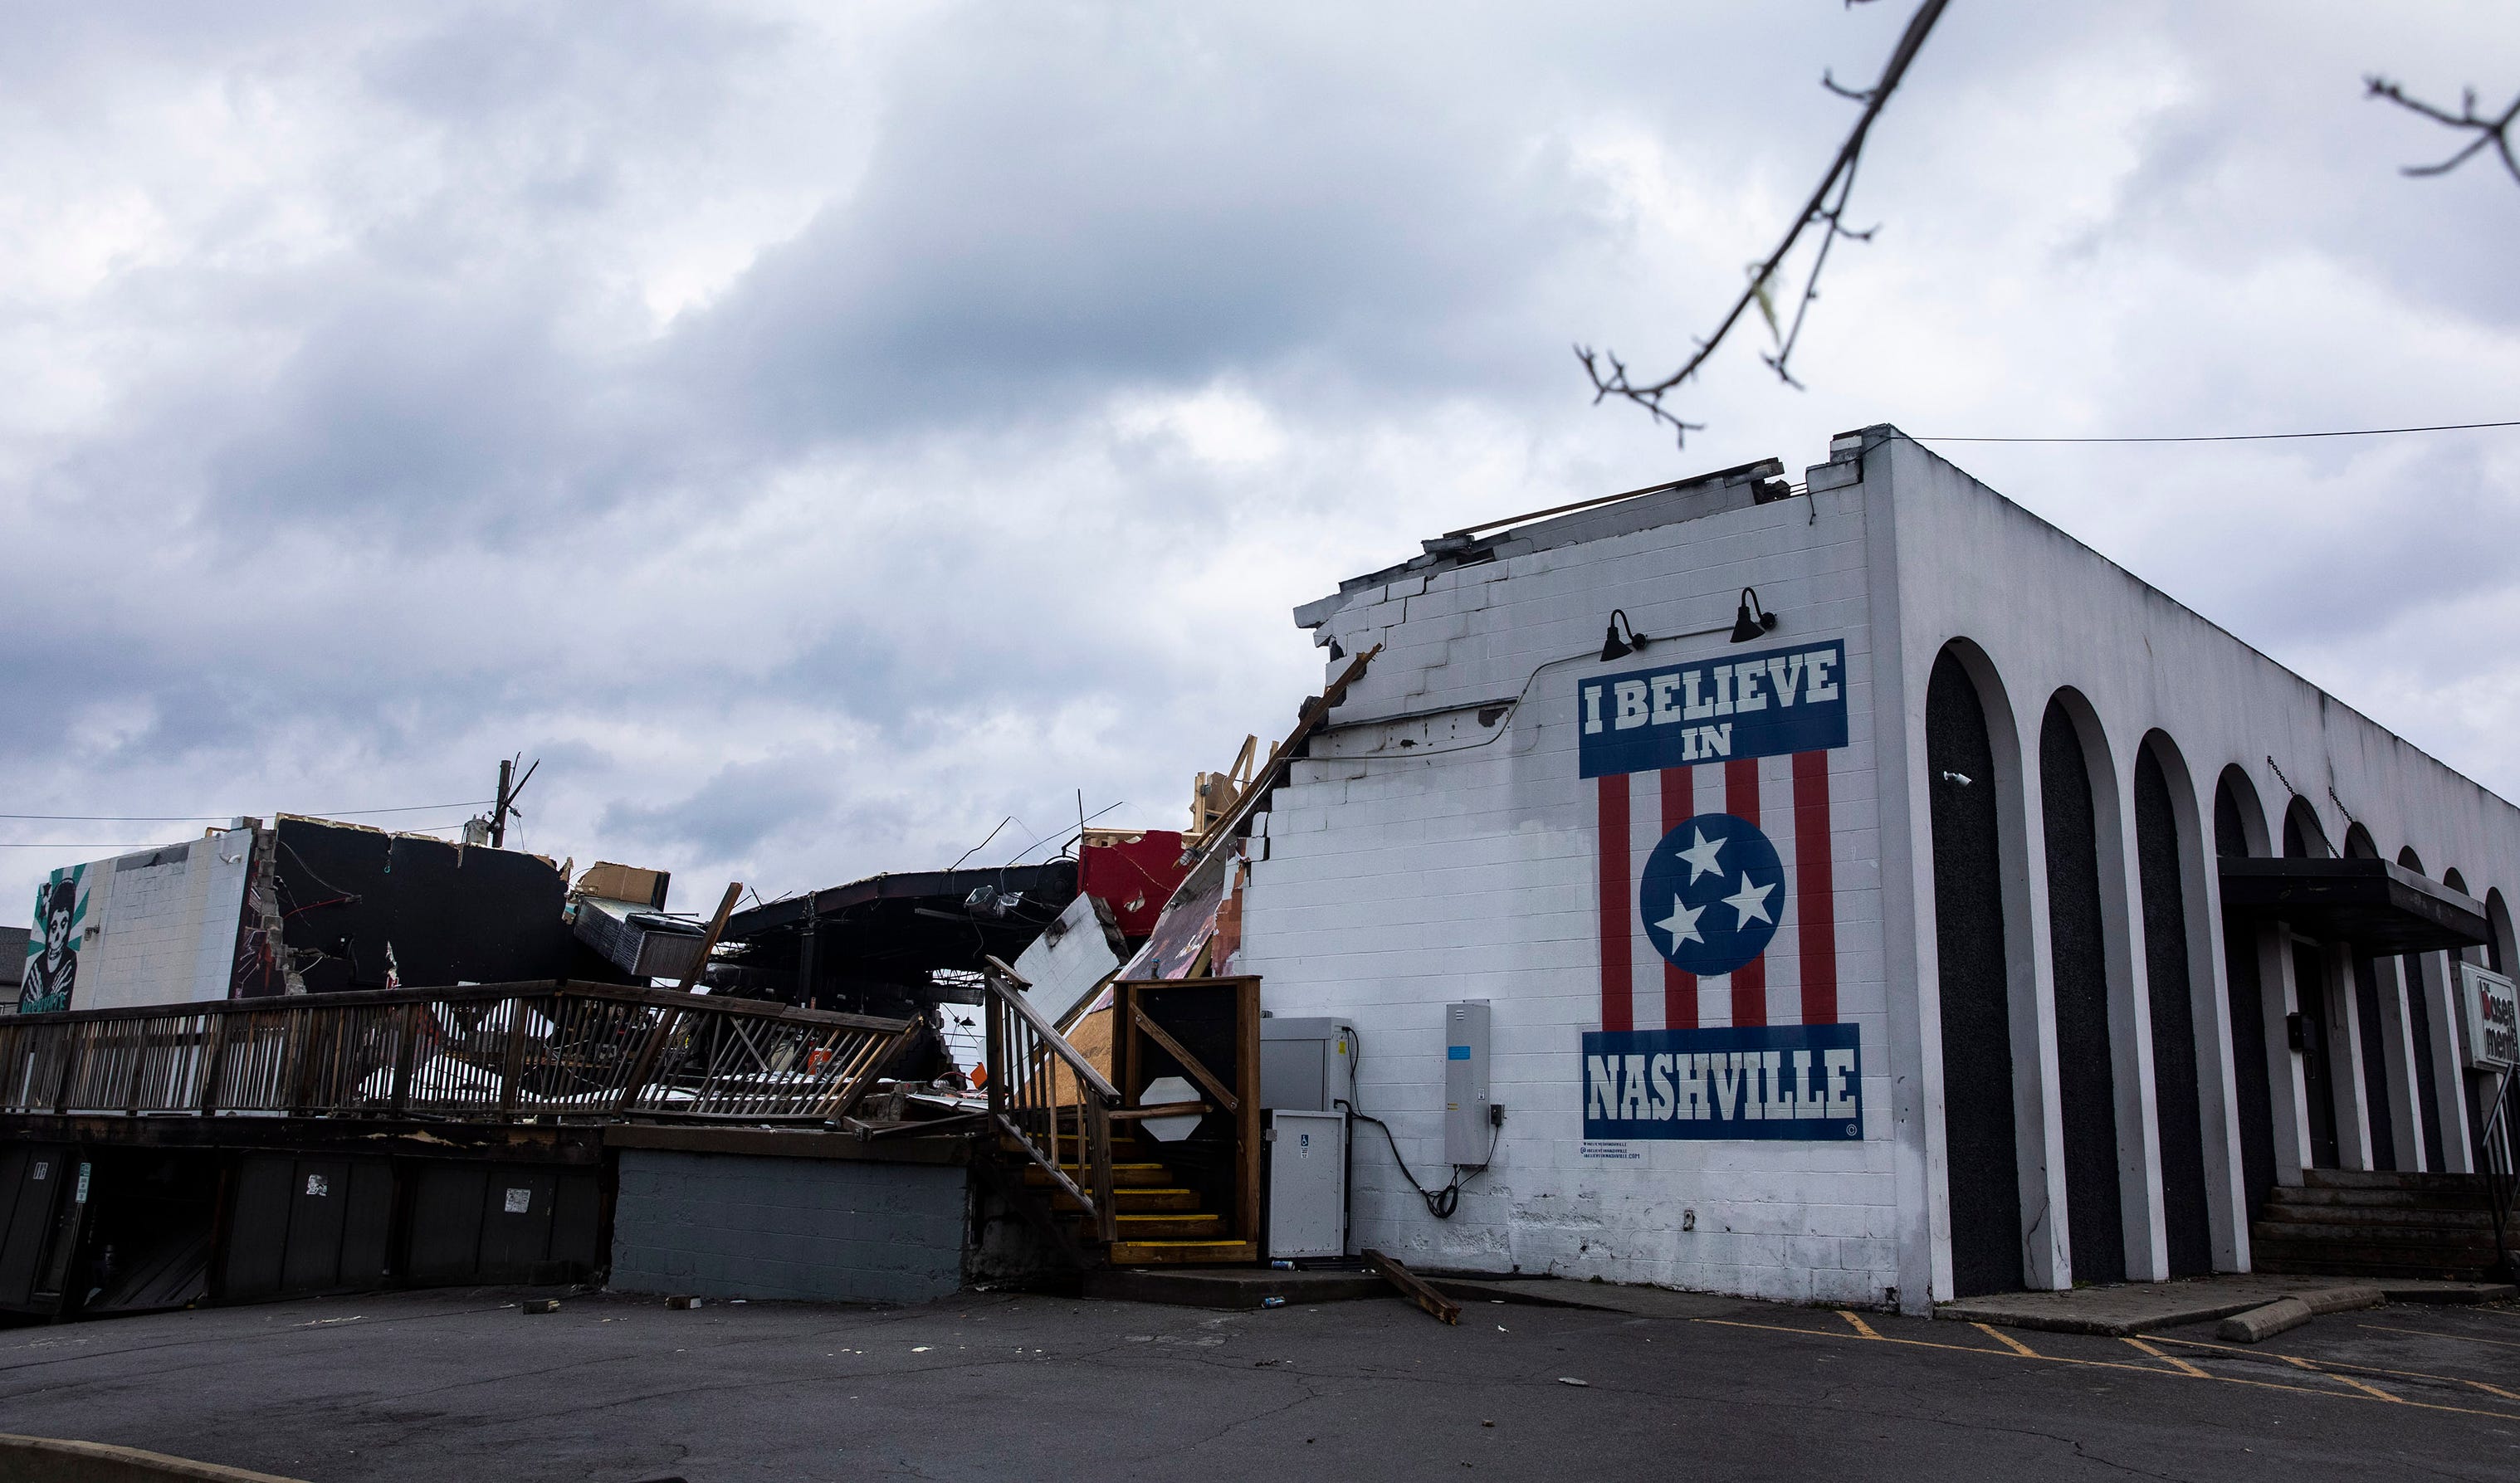 Tornado damage in East Nashville photographed Tuesday, March 3, 2020.